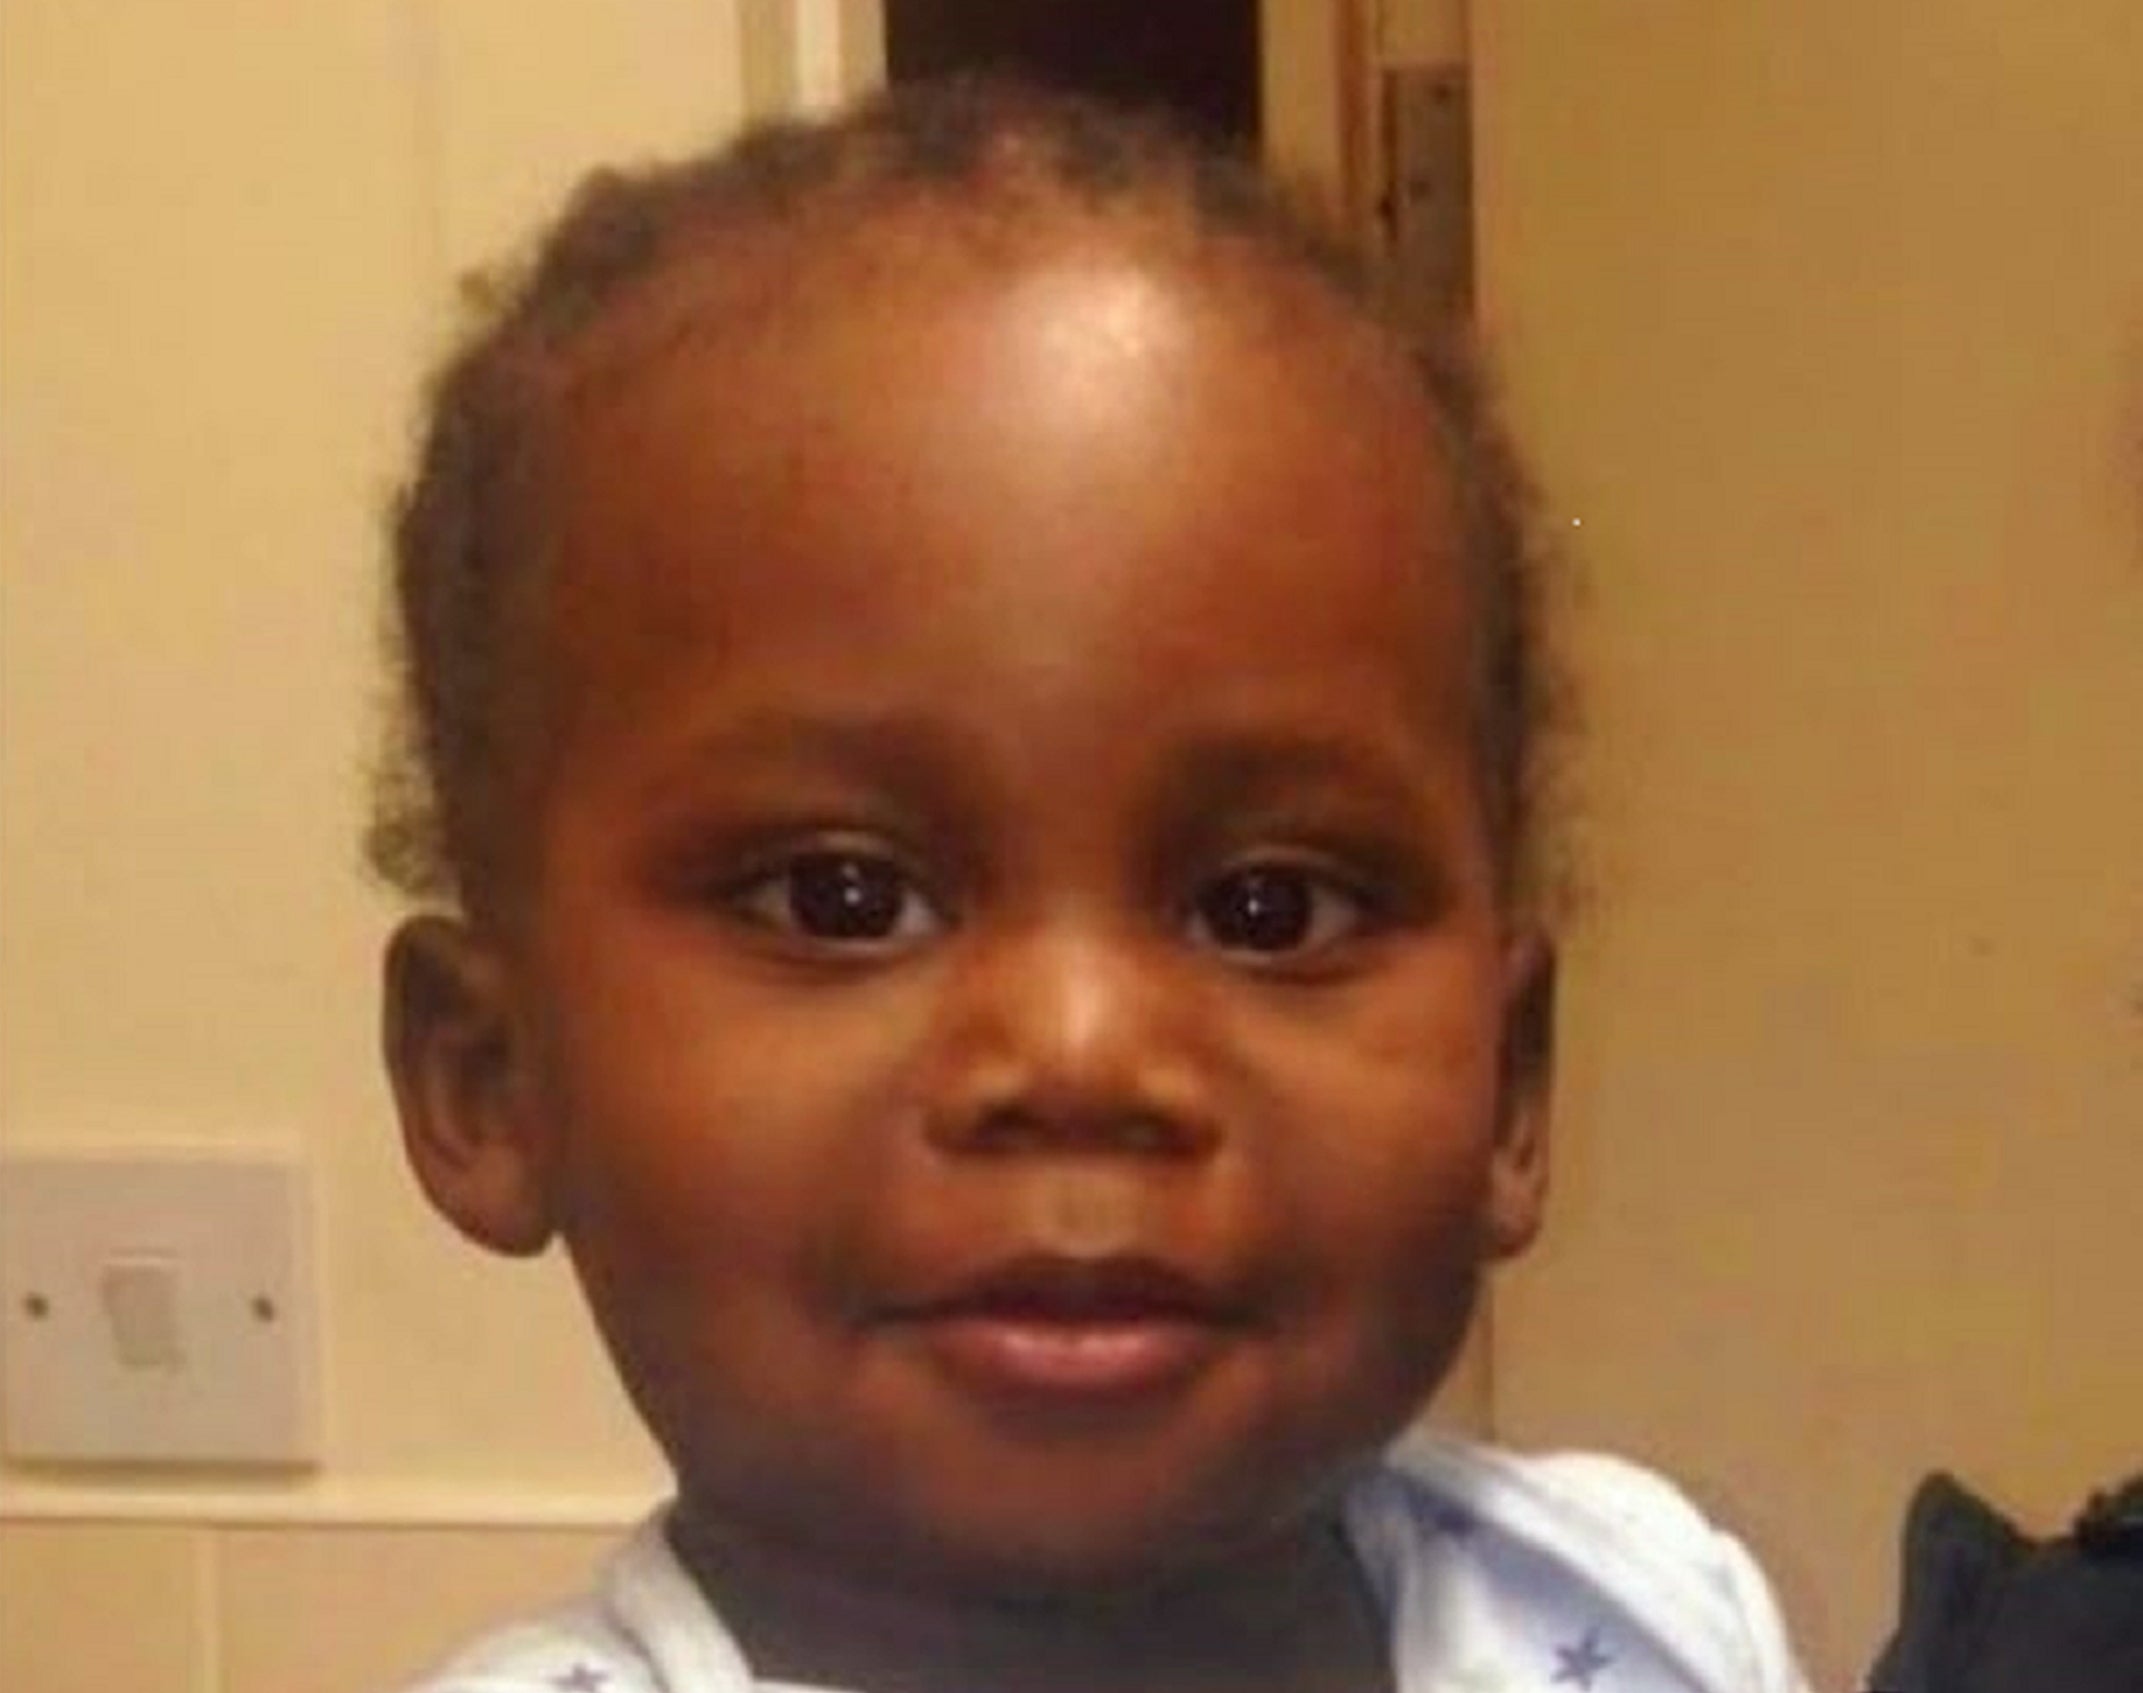 Three-year-old Kemarni Watson Darby suffered beatings so severe in the weeks before his murder his injuries were likened to those of a car crash victim